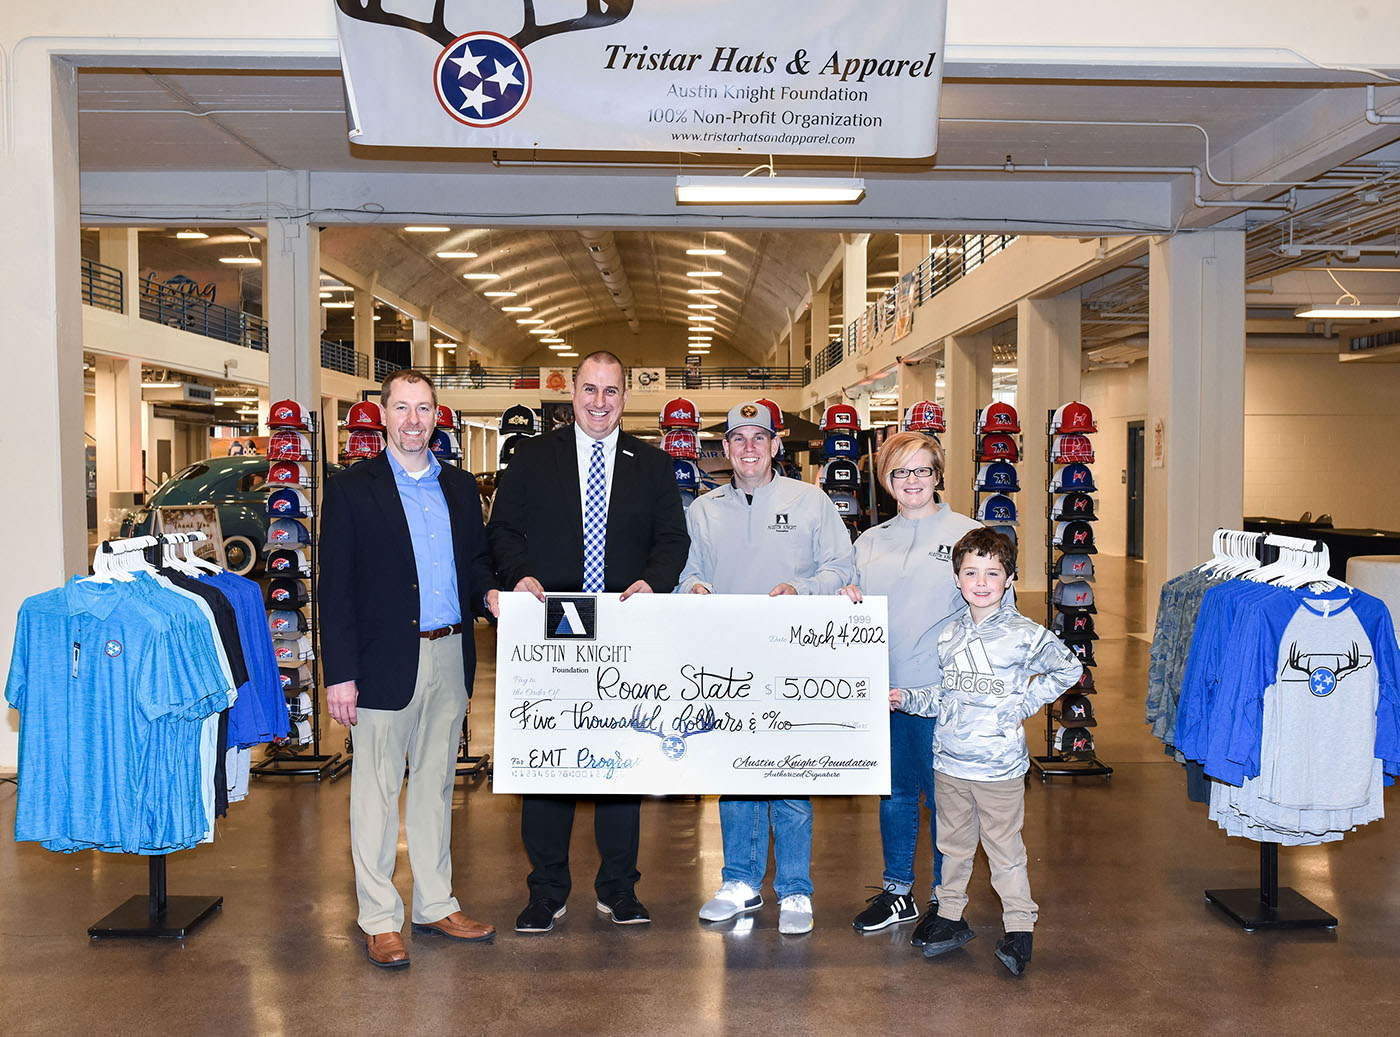 The Austin Knight Foundation presents a $5,000 donation to Roane State Foundation in support of the community college’s EMS program. Pictured left to right are Scott Niermann, executive director of Roane State Foundation; David Blevins, Roane State EMS program director; William “B.J.” Hillard, Amanda Hillard and son Finn.